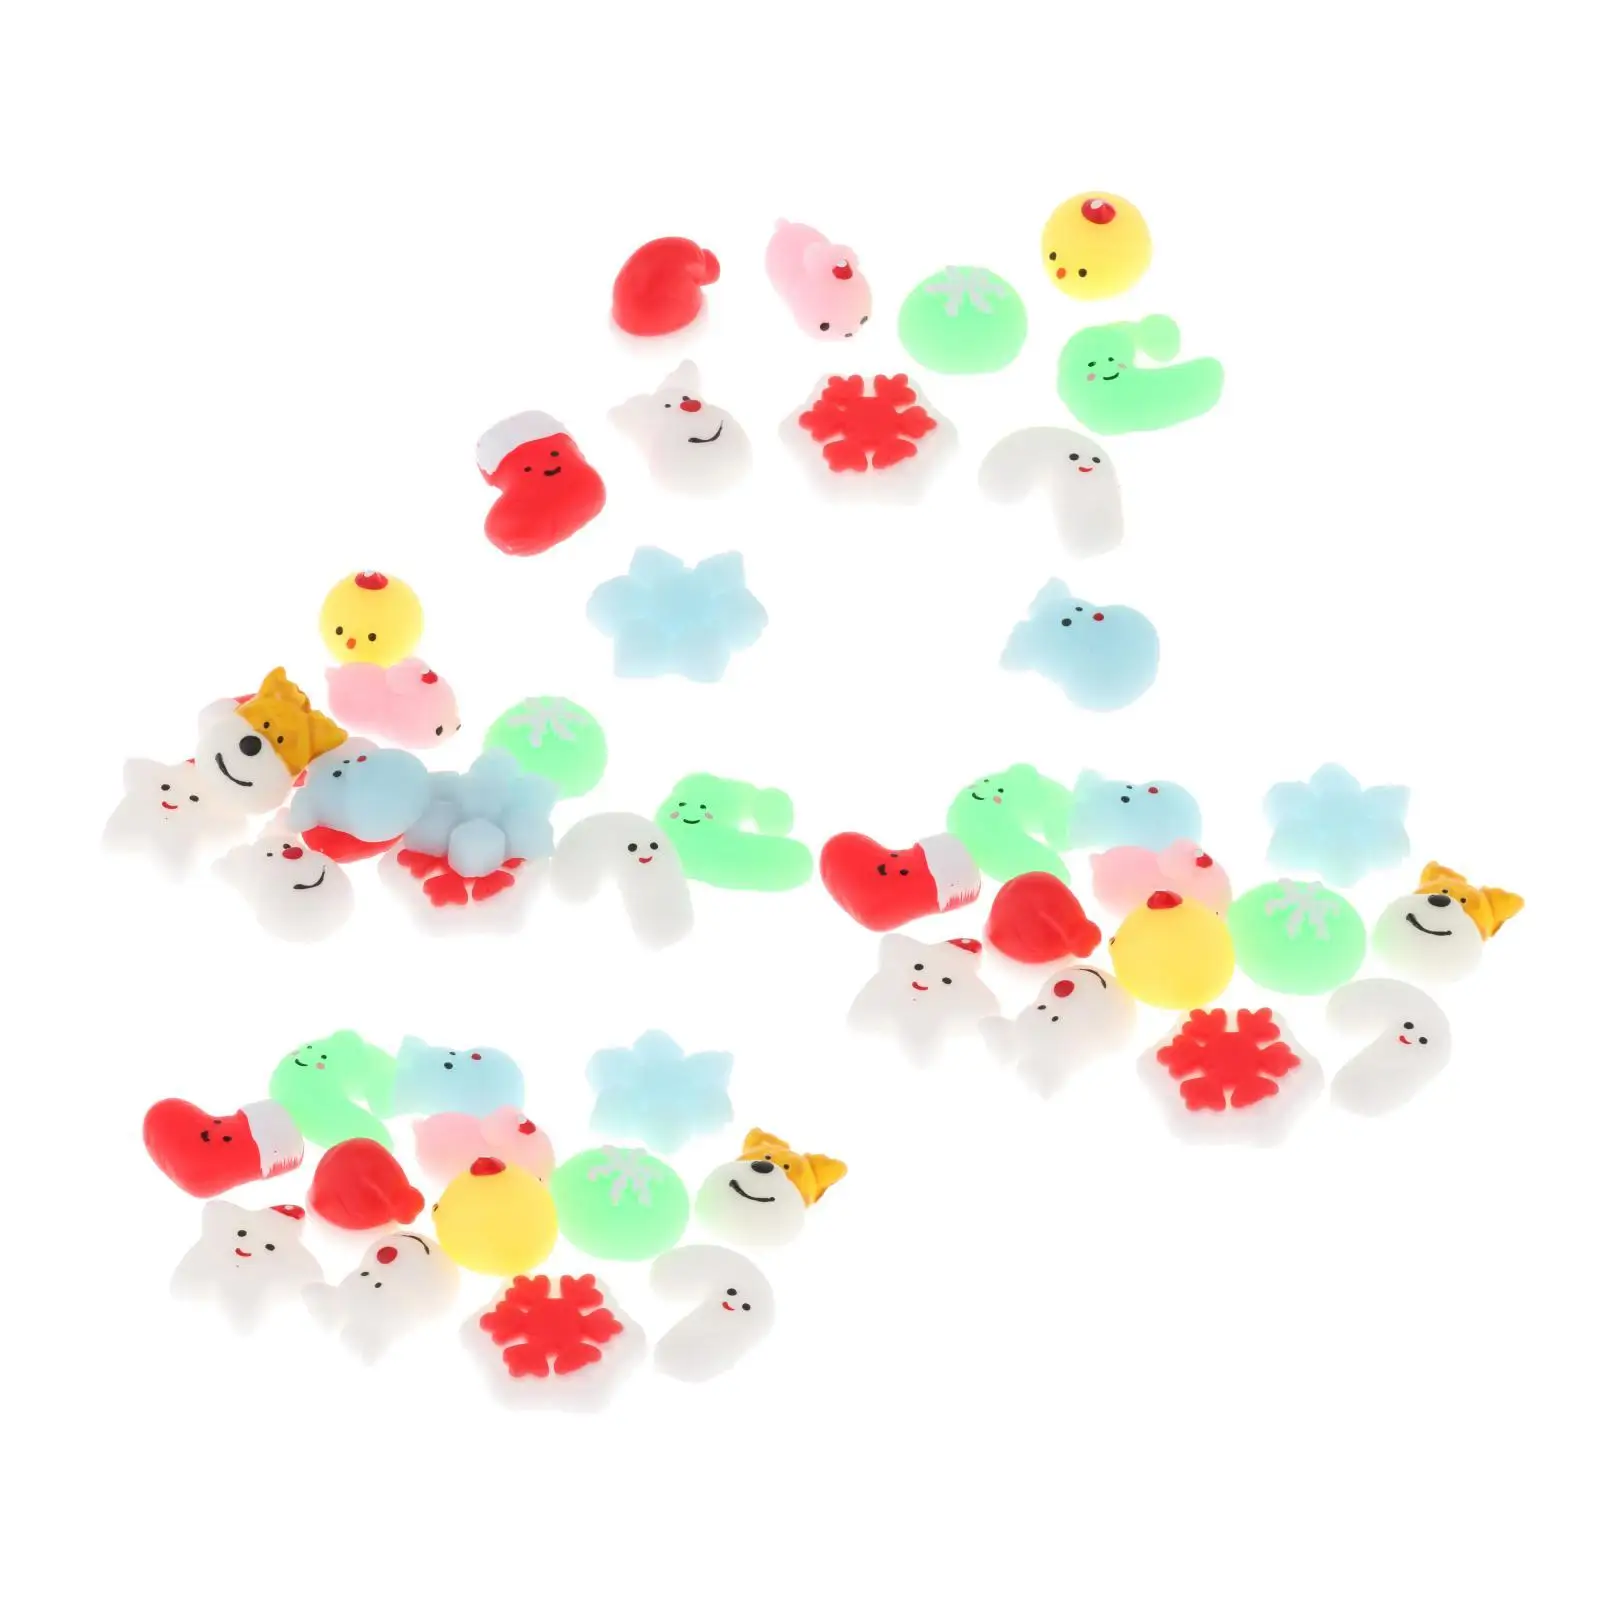 50 Pieces Mini Squeezing Toys Interesting for Stocking Stuffers Party Favors